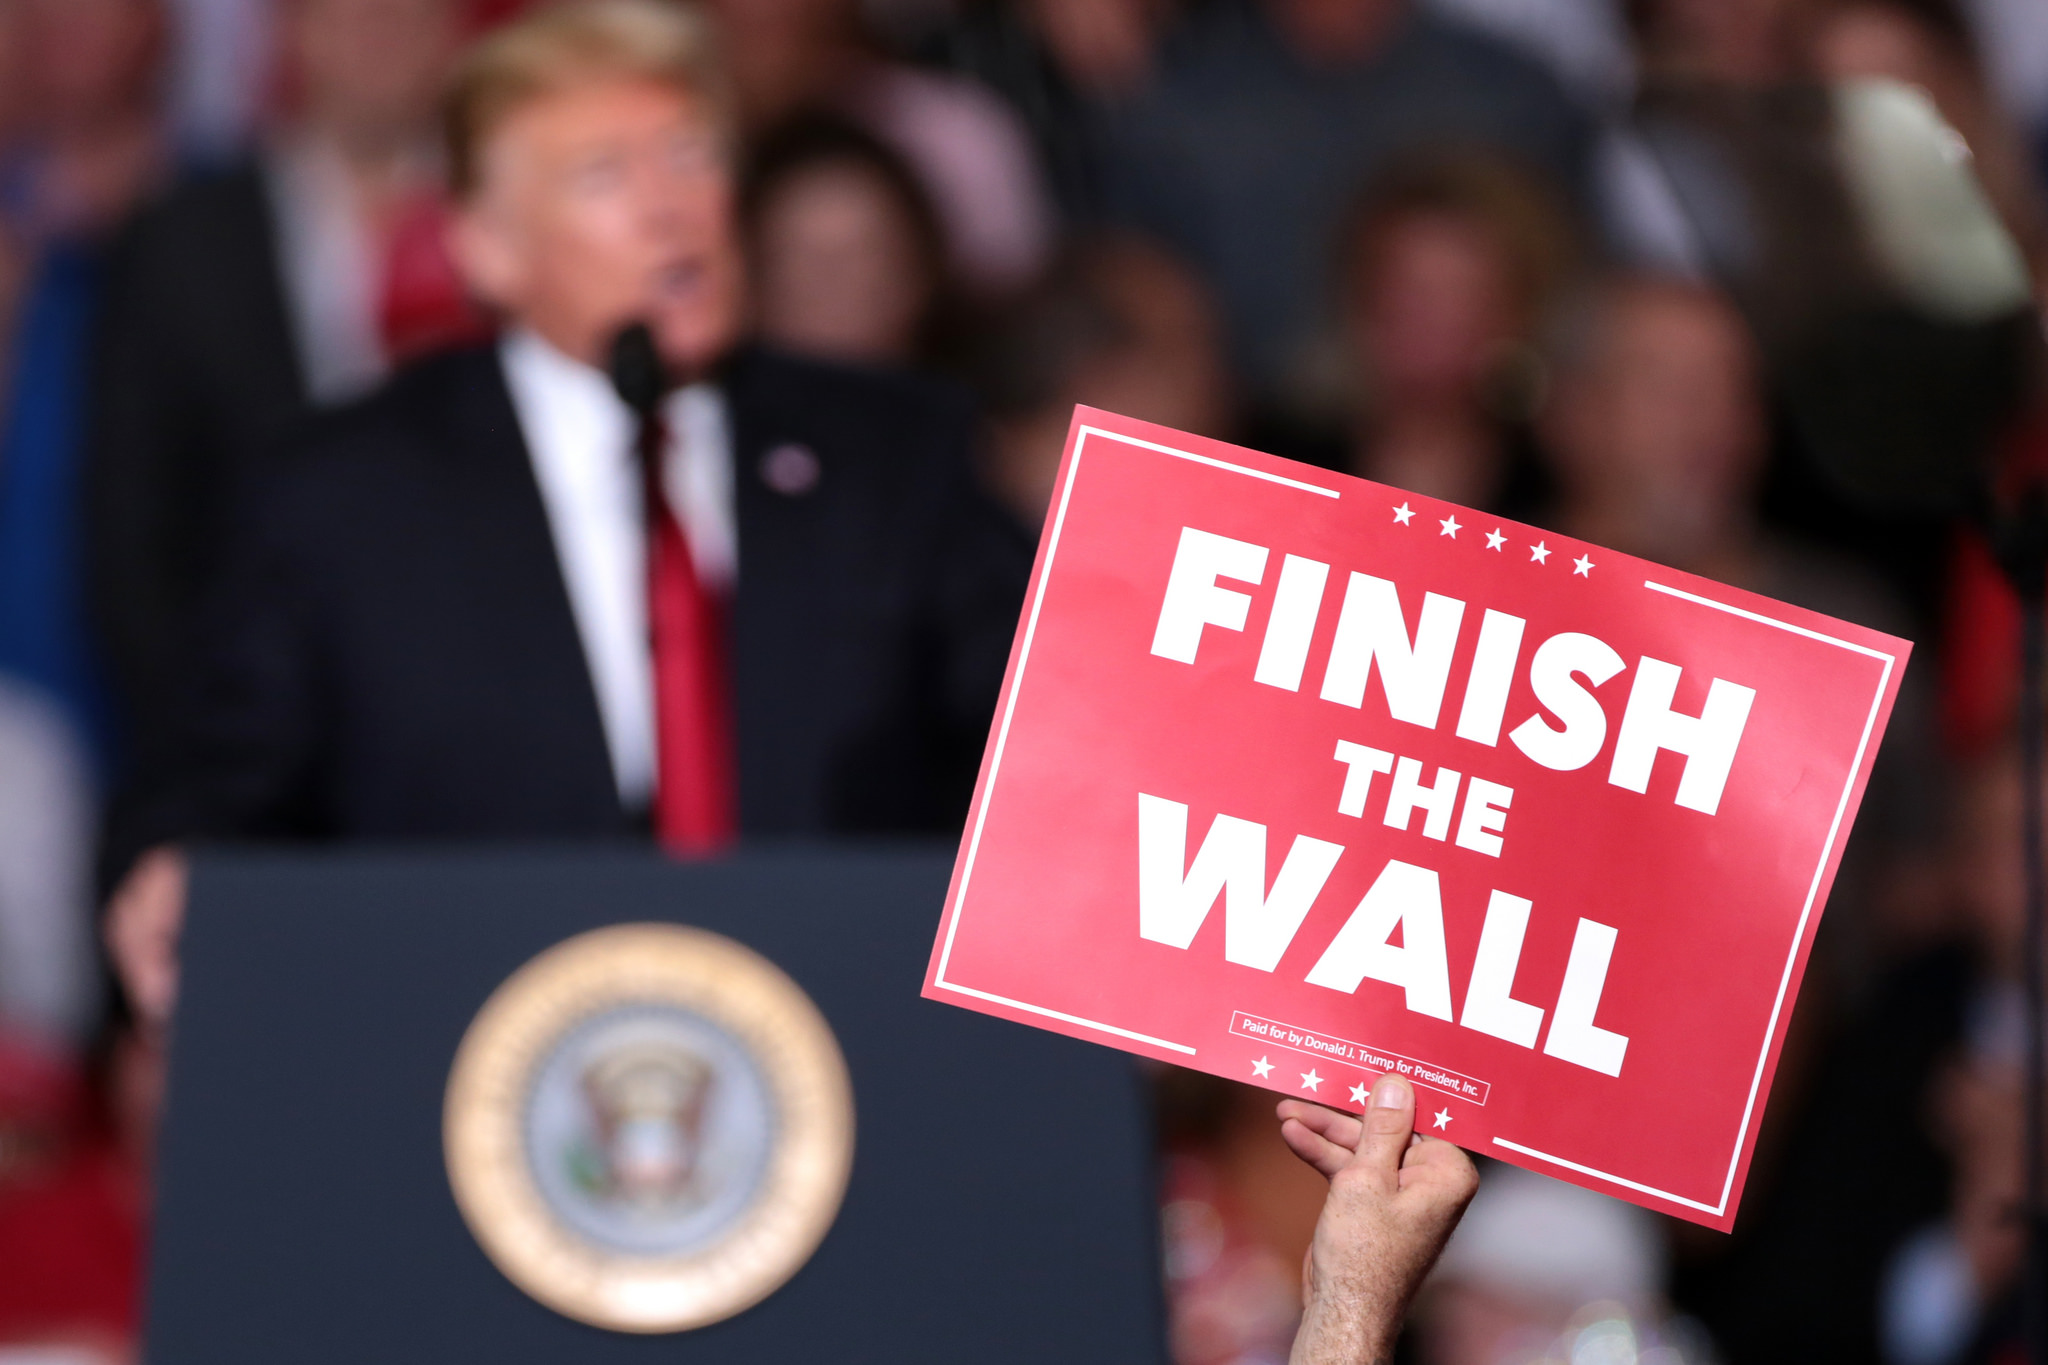 Donald Trump speaking at a rally, with a "finish the wall" sign in the foreground